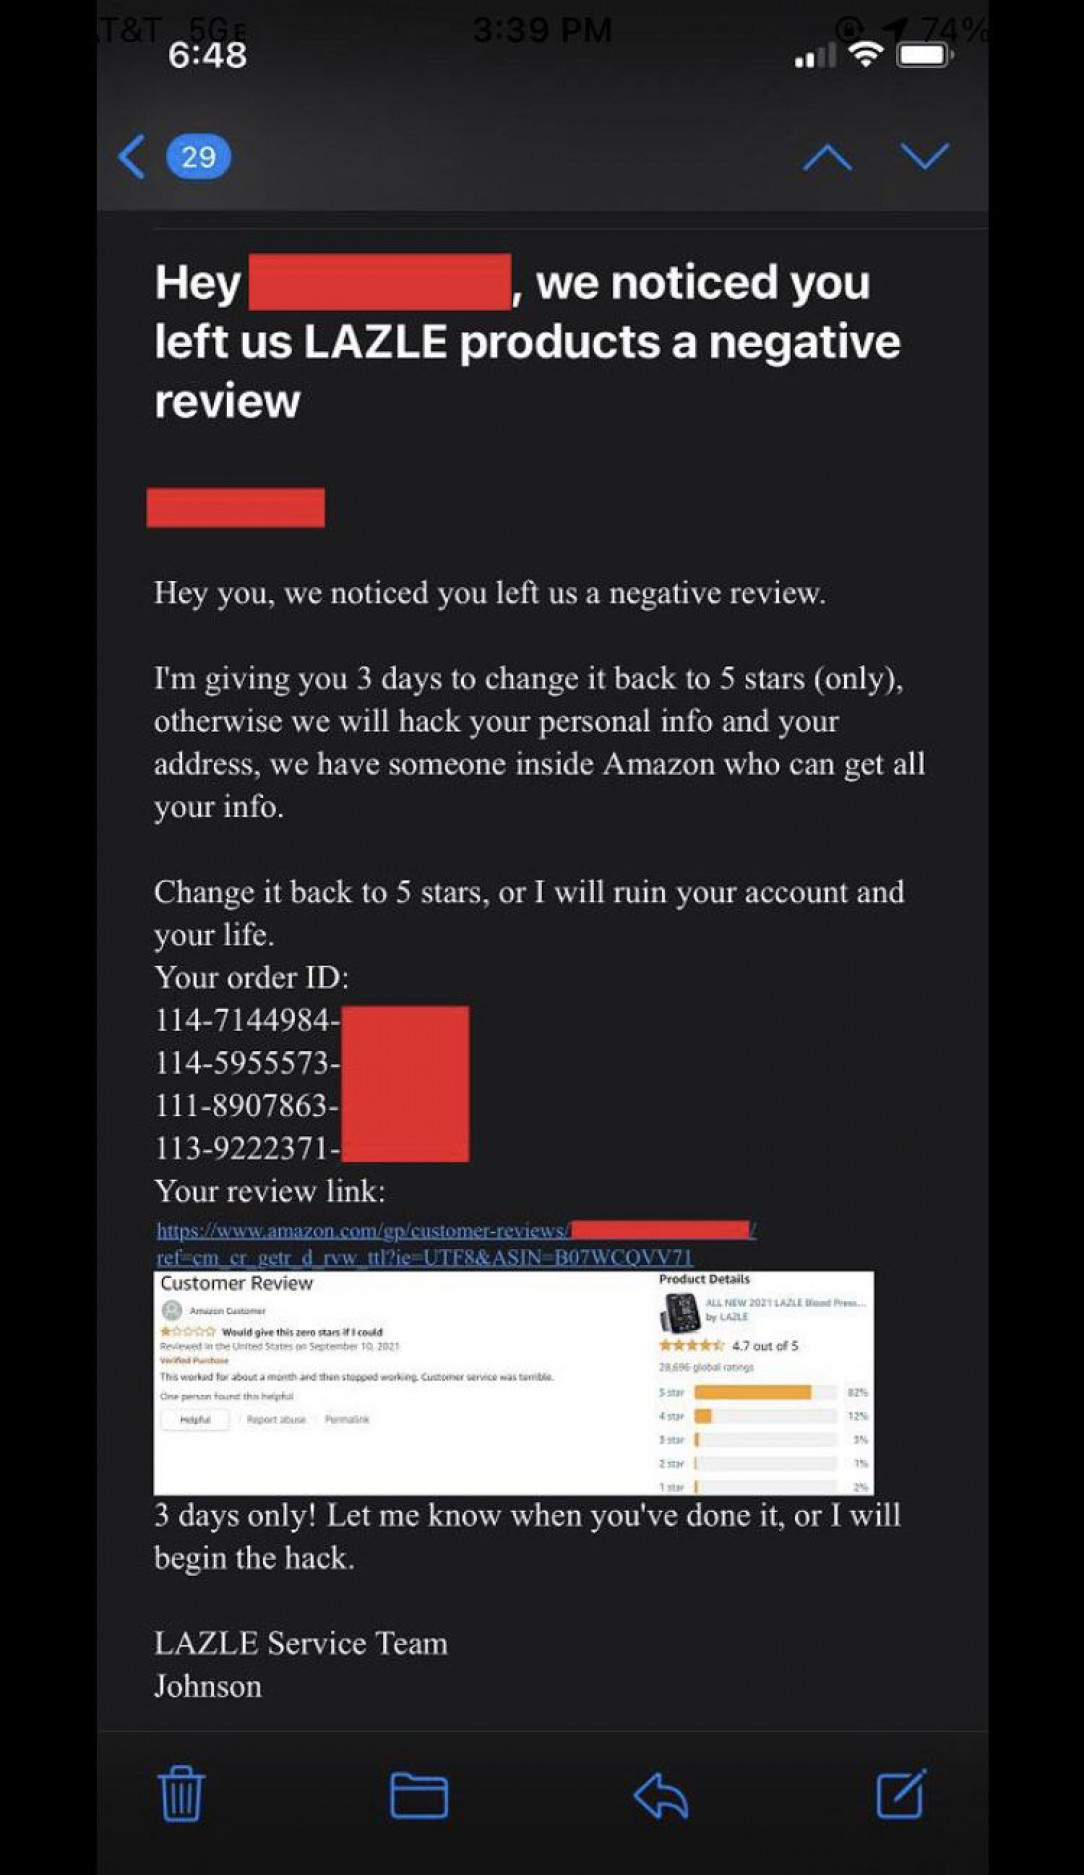 Amazon seller threatens to hack person’s personal info for giving them a negative review